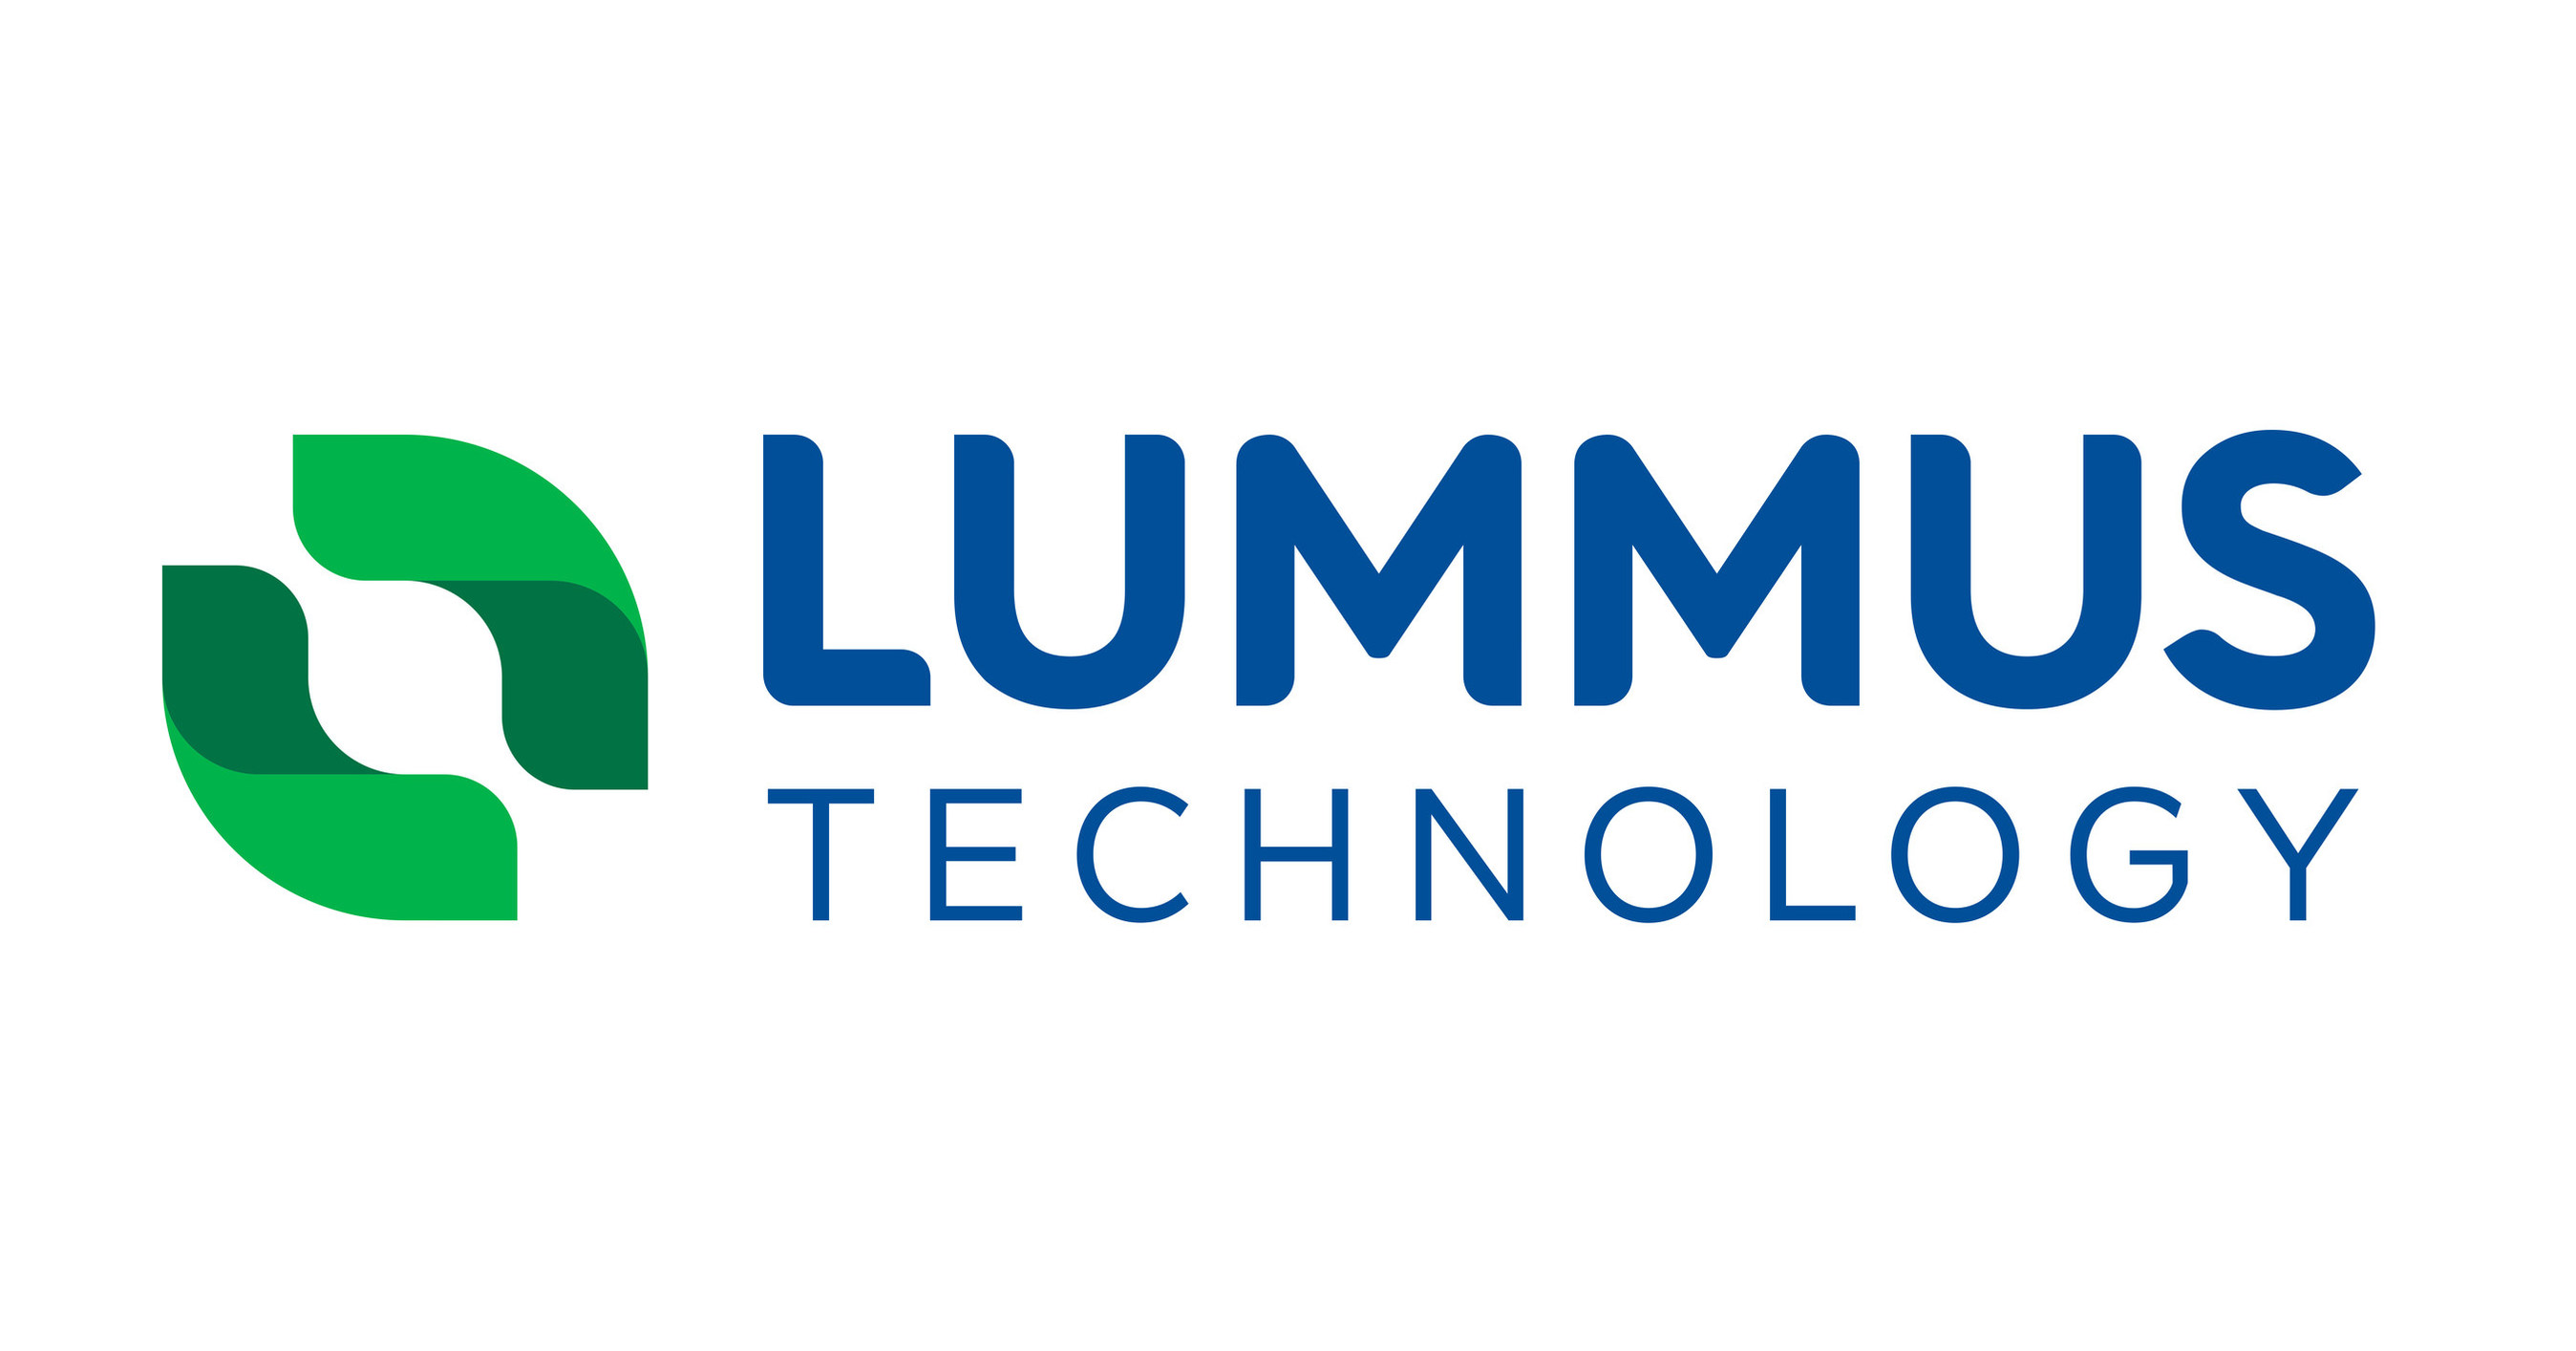 Indian Oil Corporation Limited (IOCL) has chosen Lummus Technology for their Cumene production.